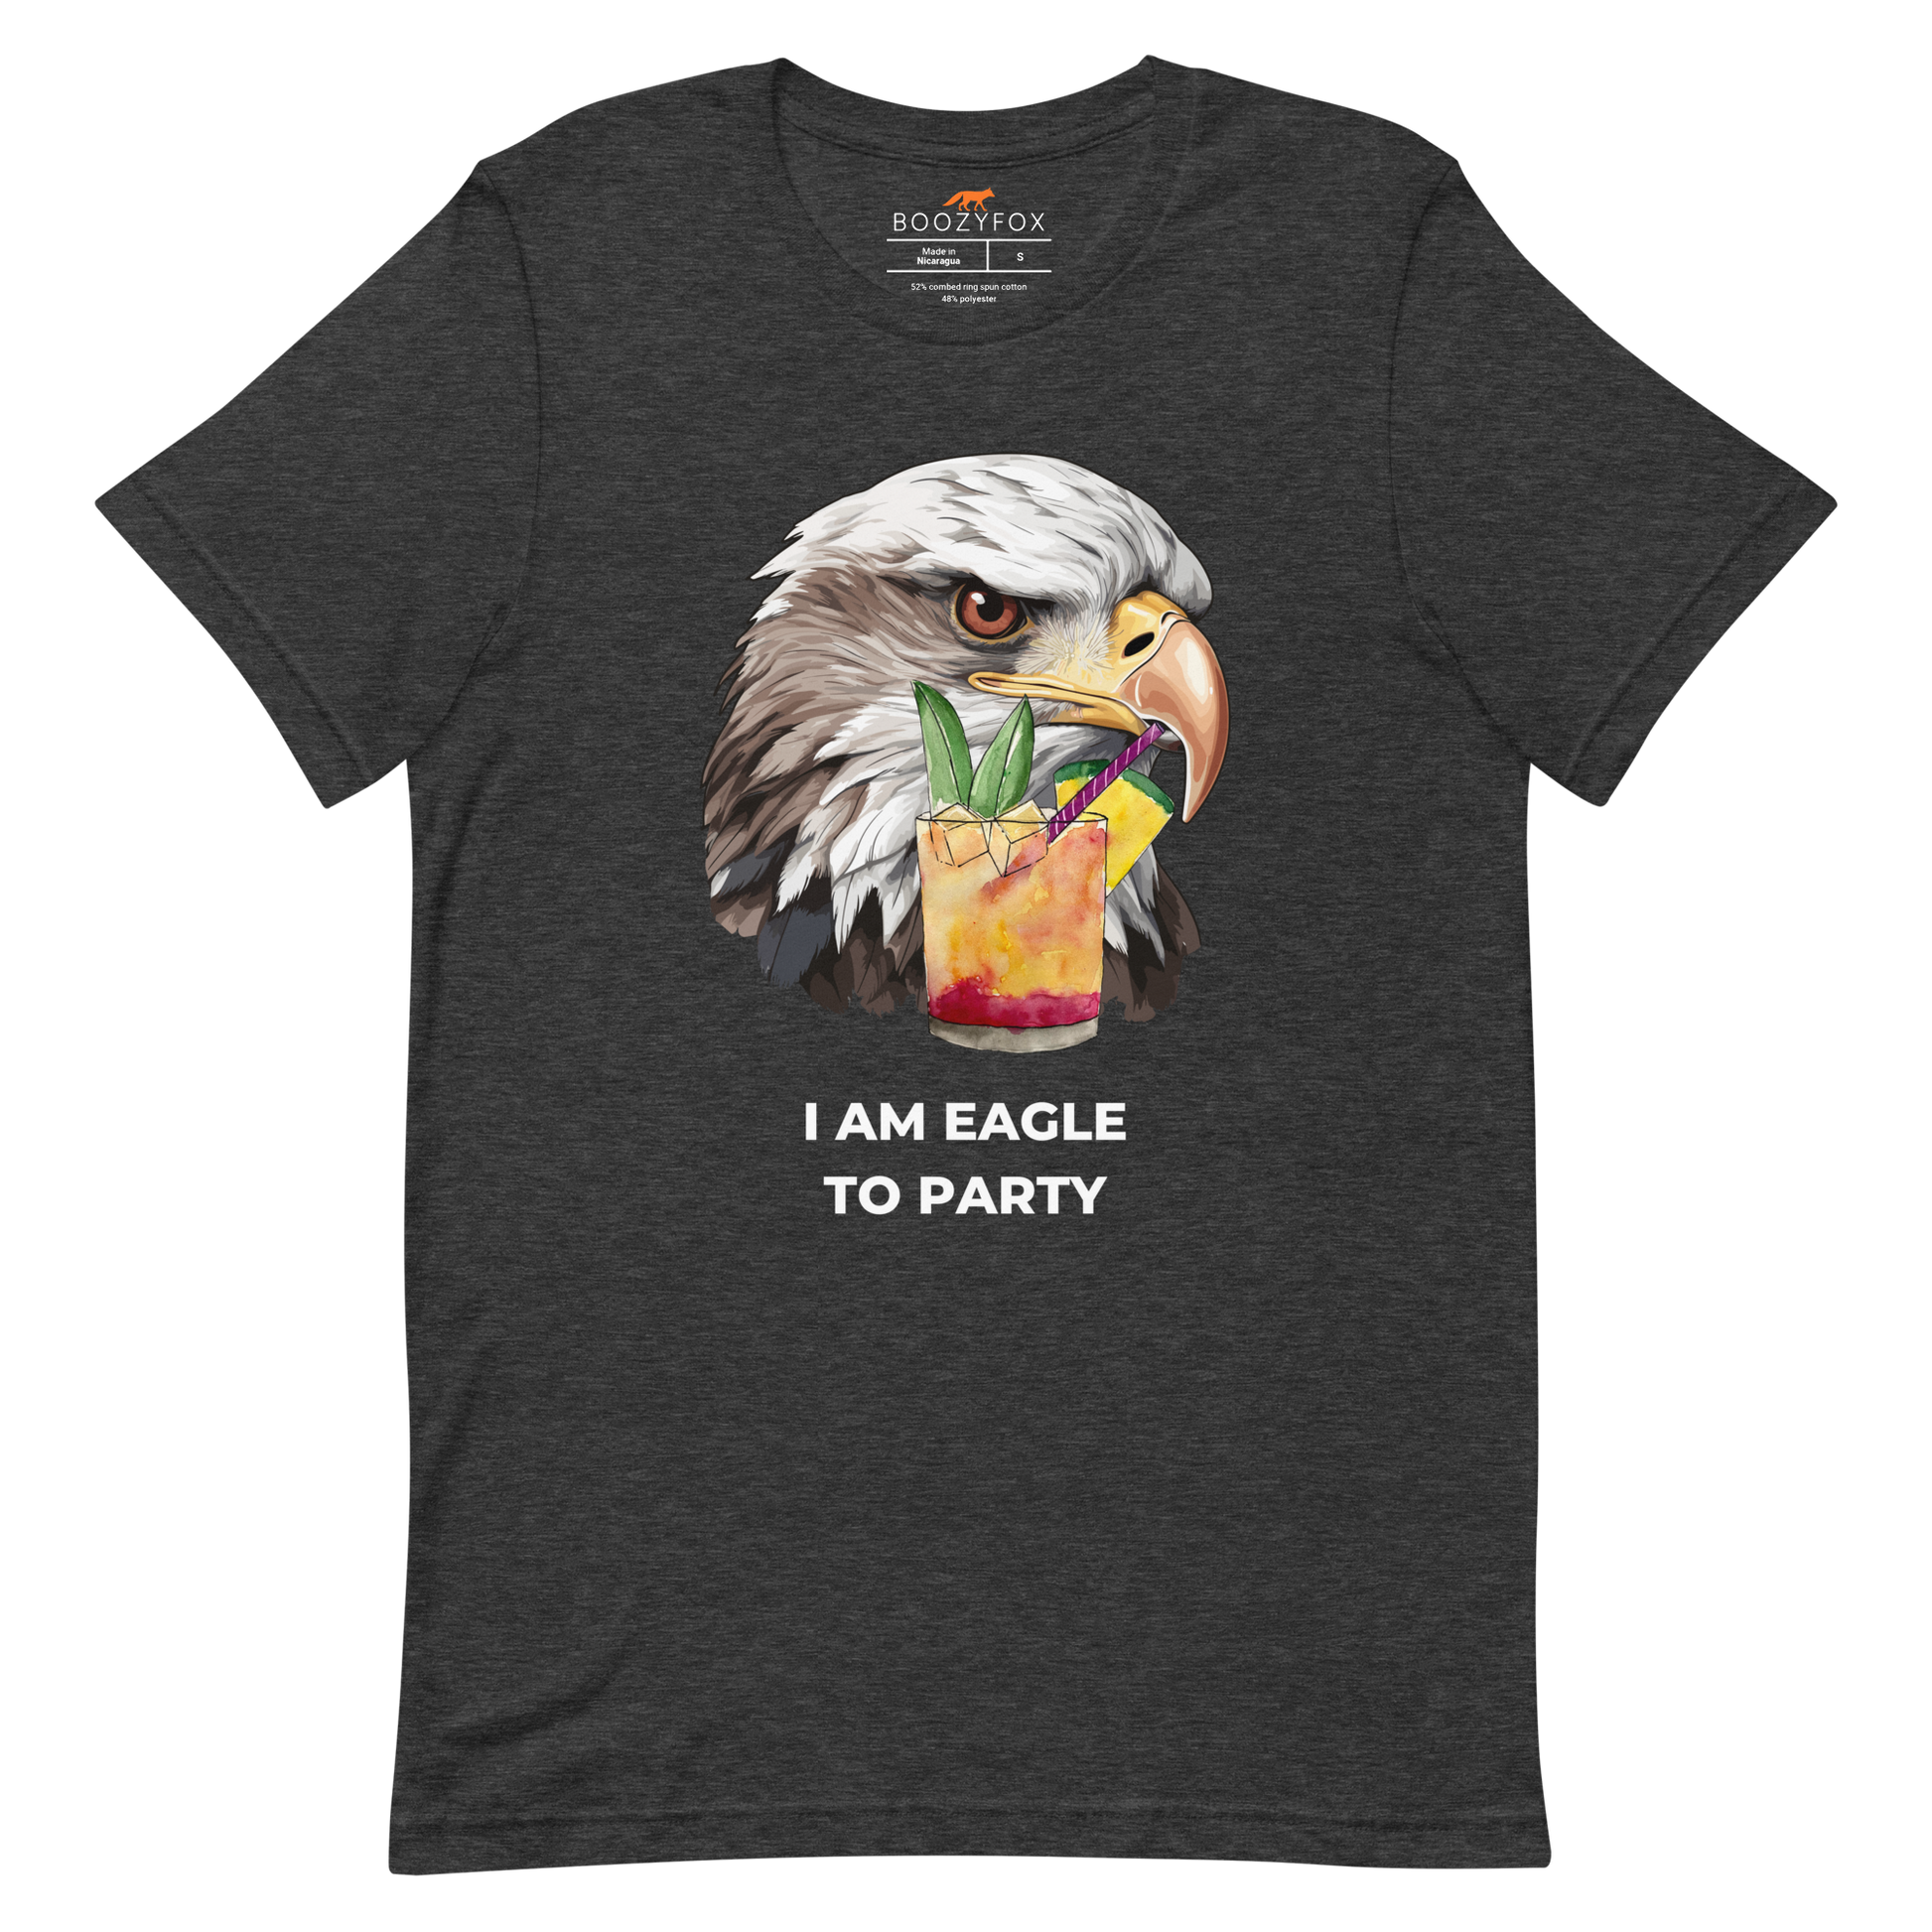 Dark Grey Heather Premium Eagle T-Shirt featuring an eye-catching I Am Eagle to Party graphic on the chest - Funny Graphic Eagle Tees - Boozy Fox